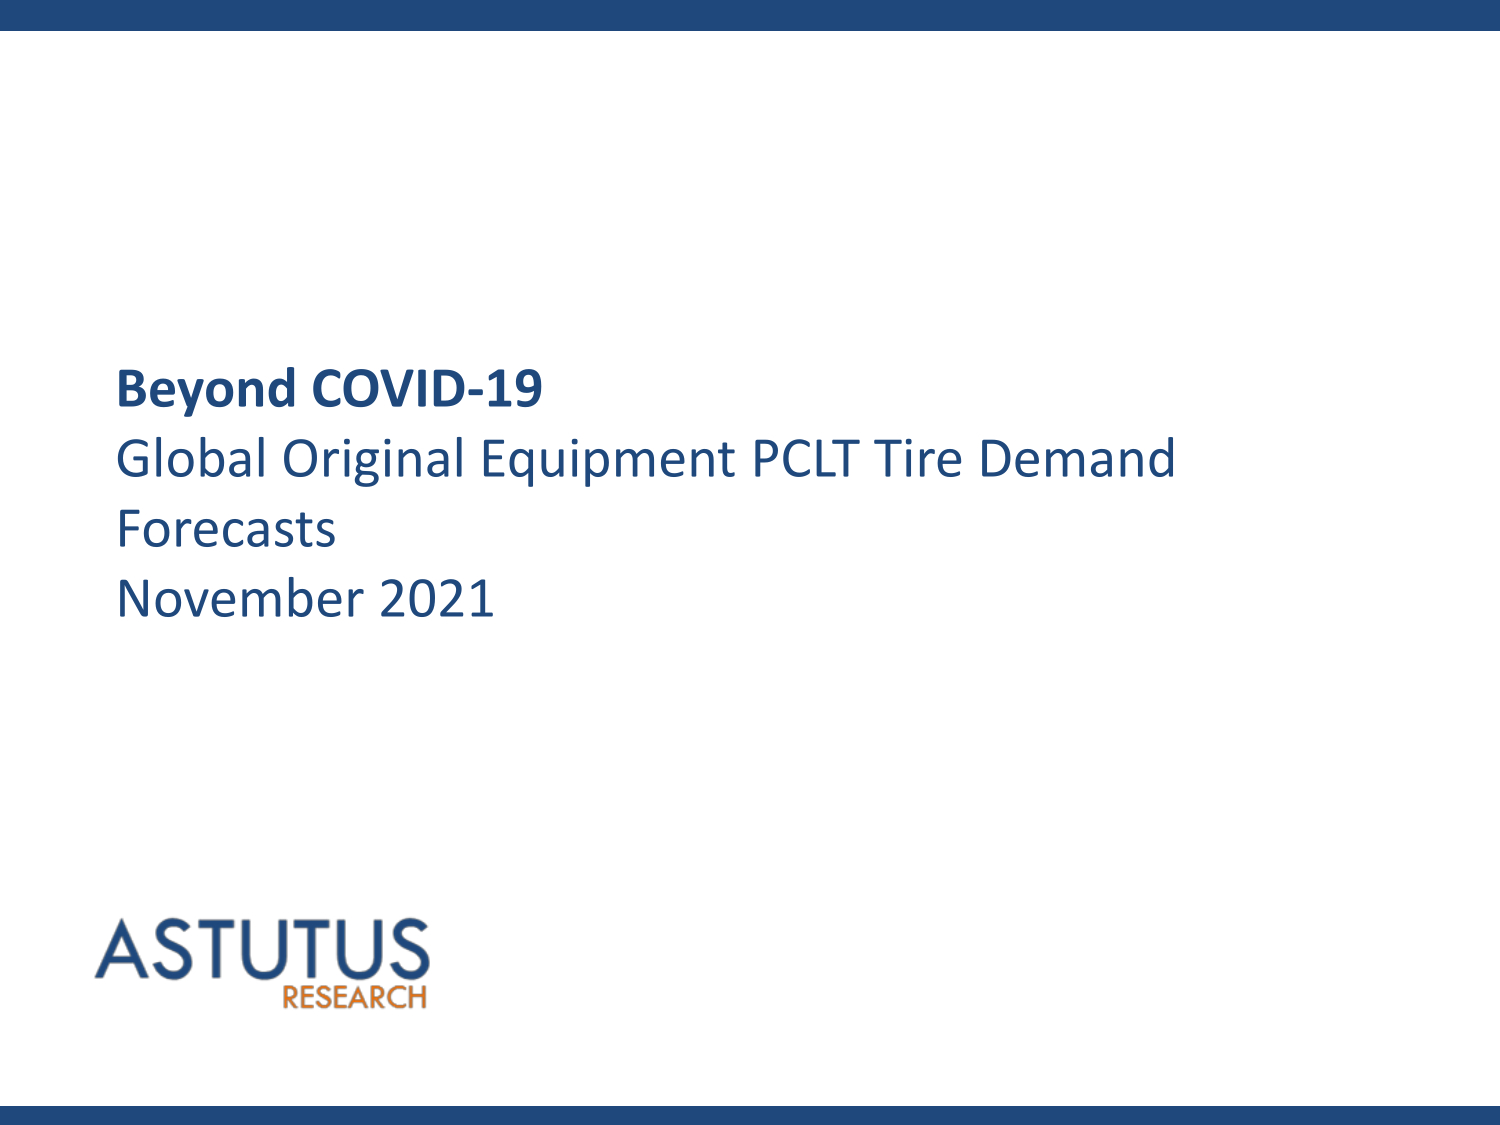 Beyond Covid-19 - Global Original Equipment PCLT Tire Market Forecasts to 2025